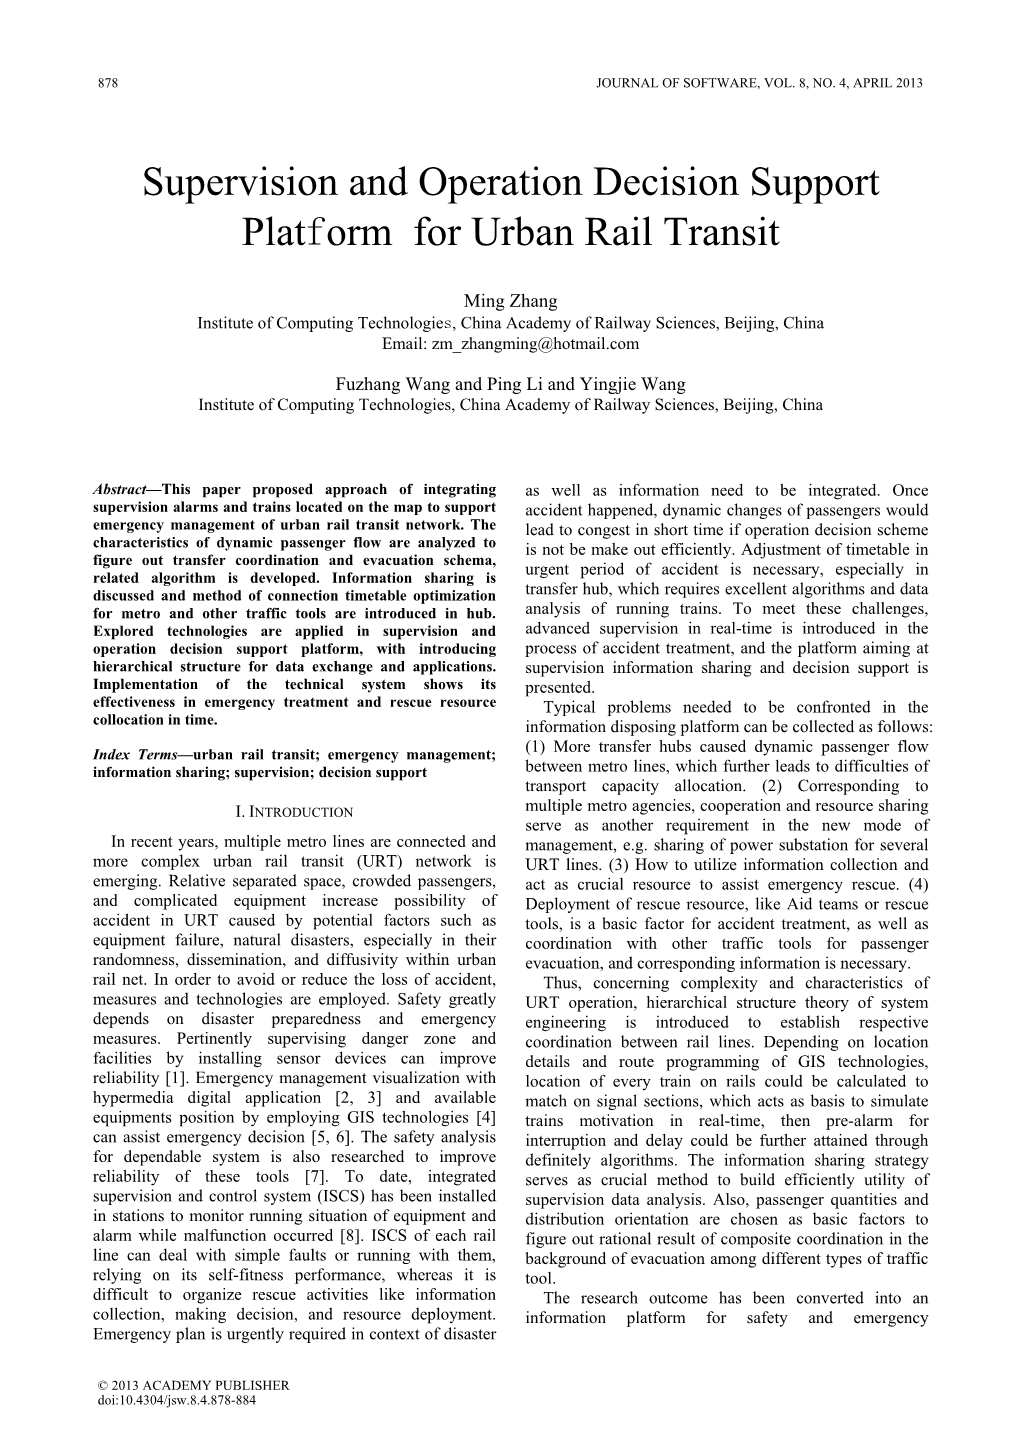 Supervision and Operation Decision Support Platform for Urban Rail Transit